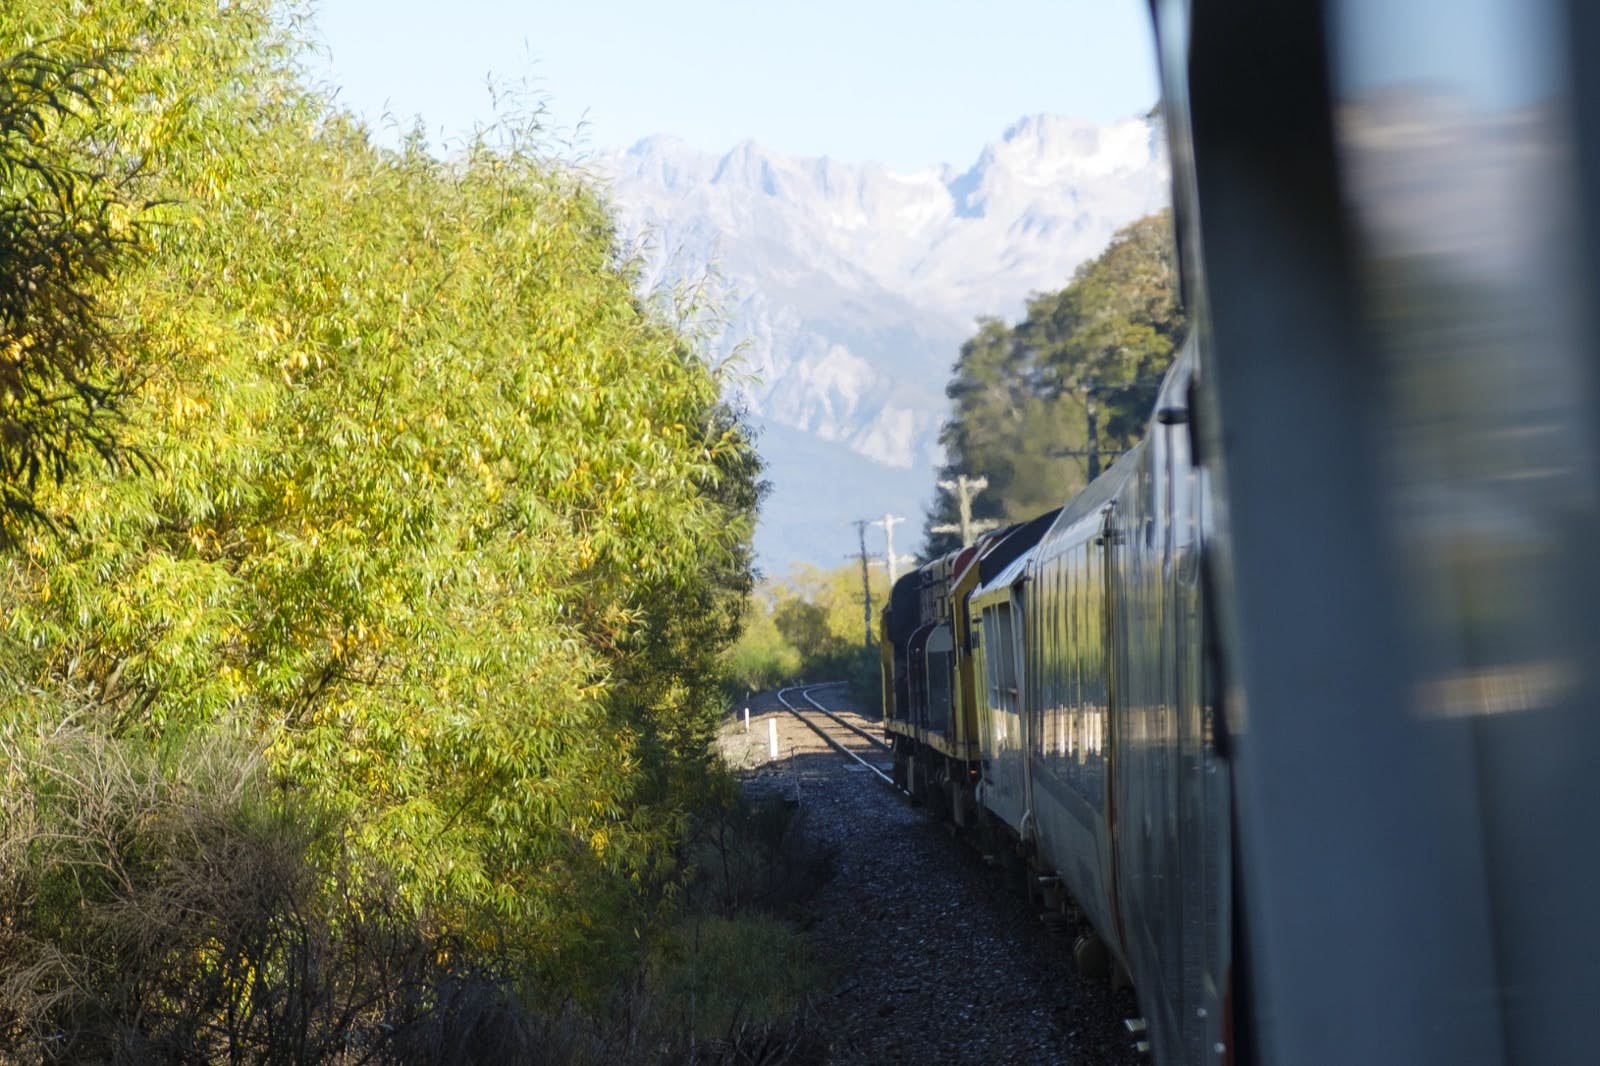 A train rumbles past some brilliant green foliage with rocky mountain outcrops up ahead; Amazing train journeys